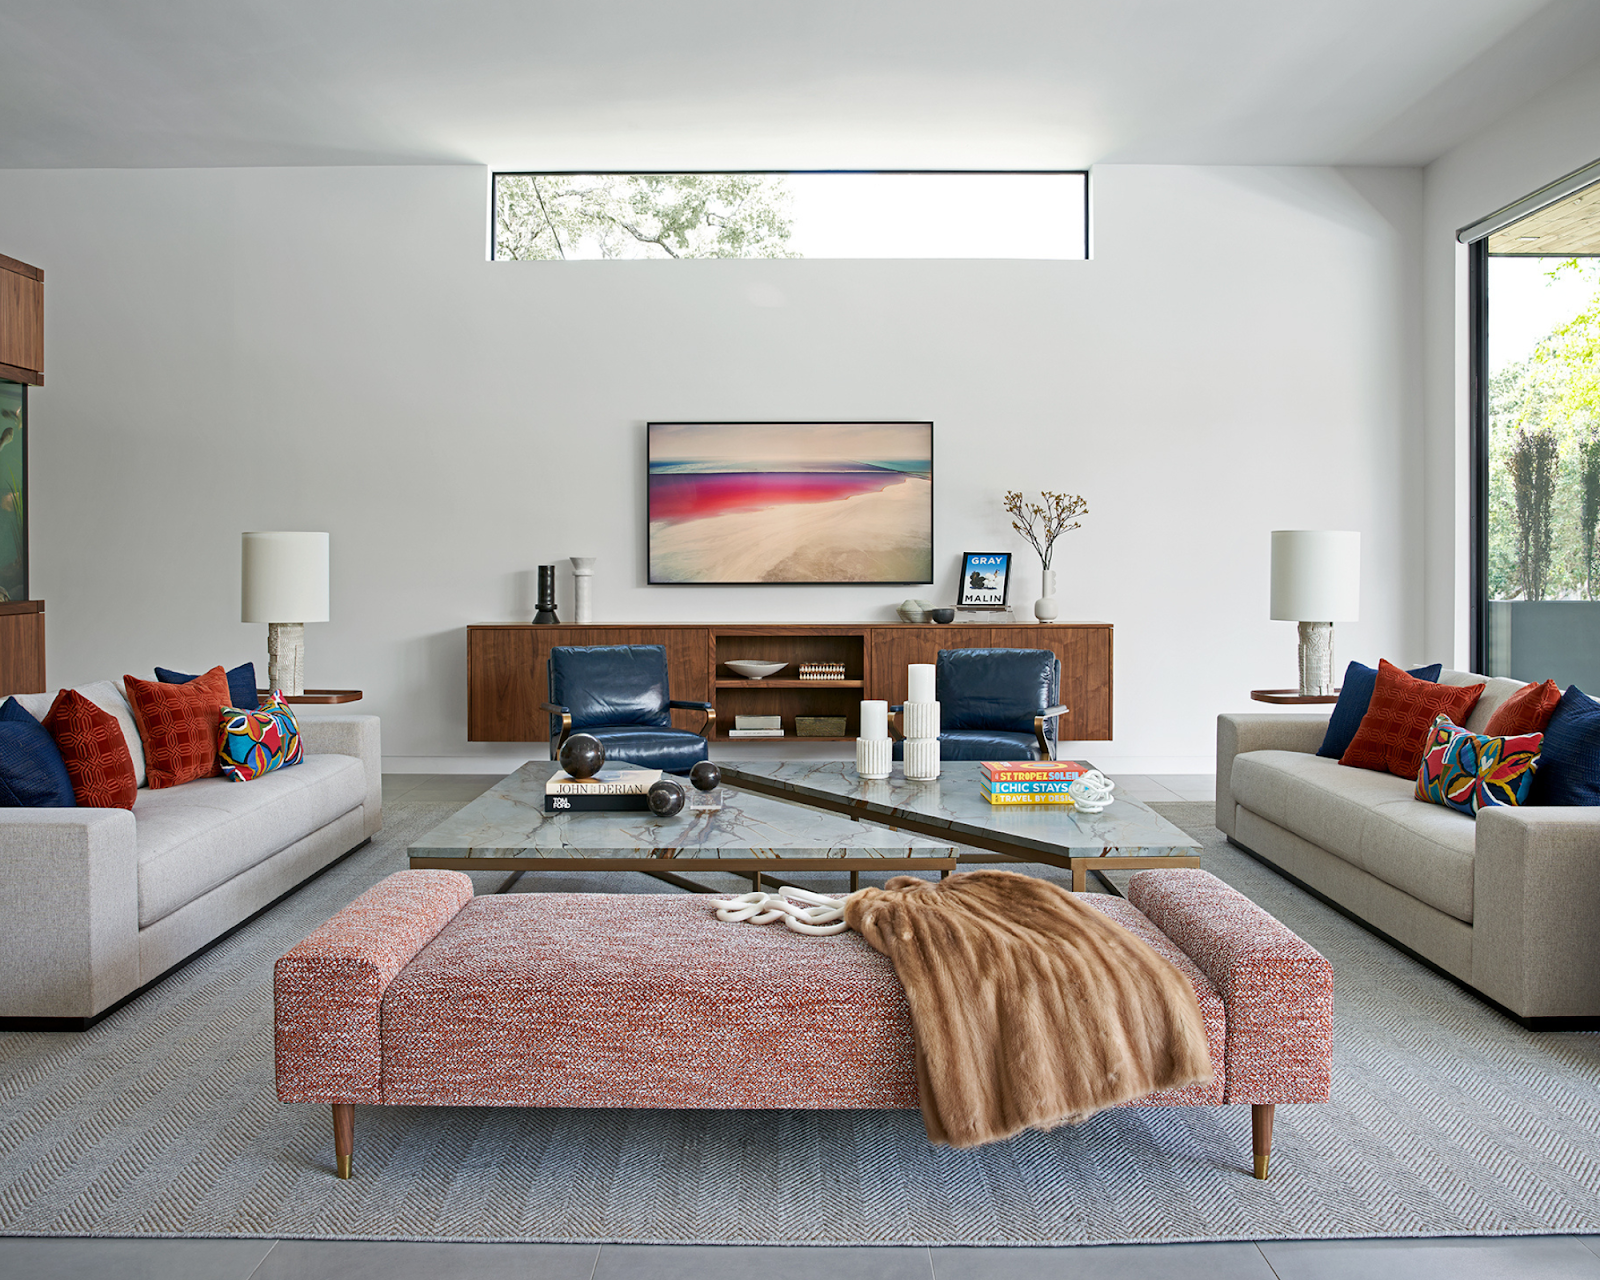 How To Mix Color with Modern Design in Your Own Home